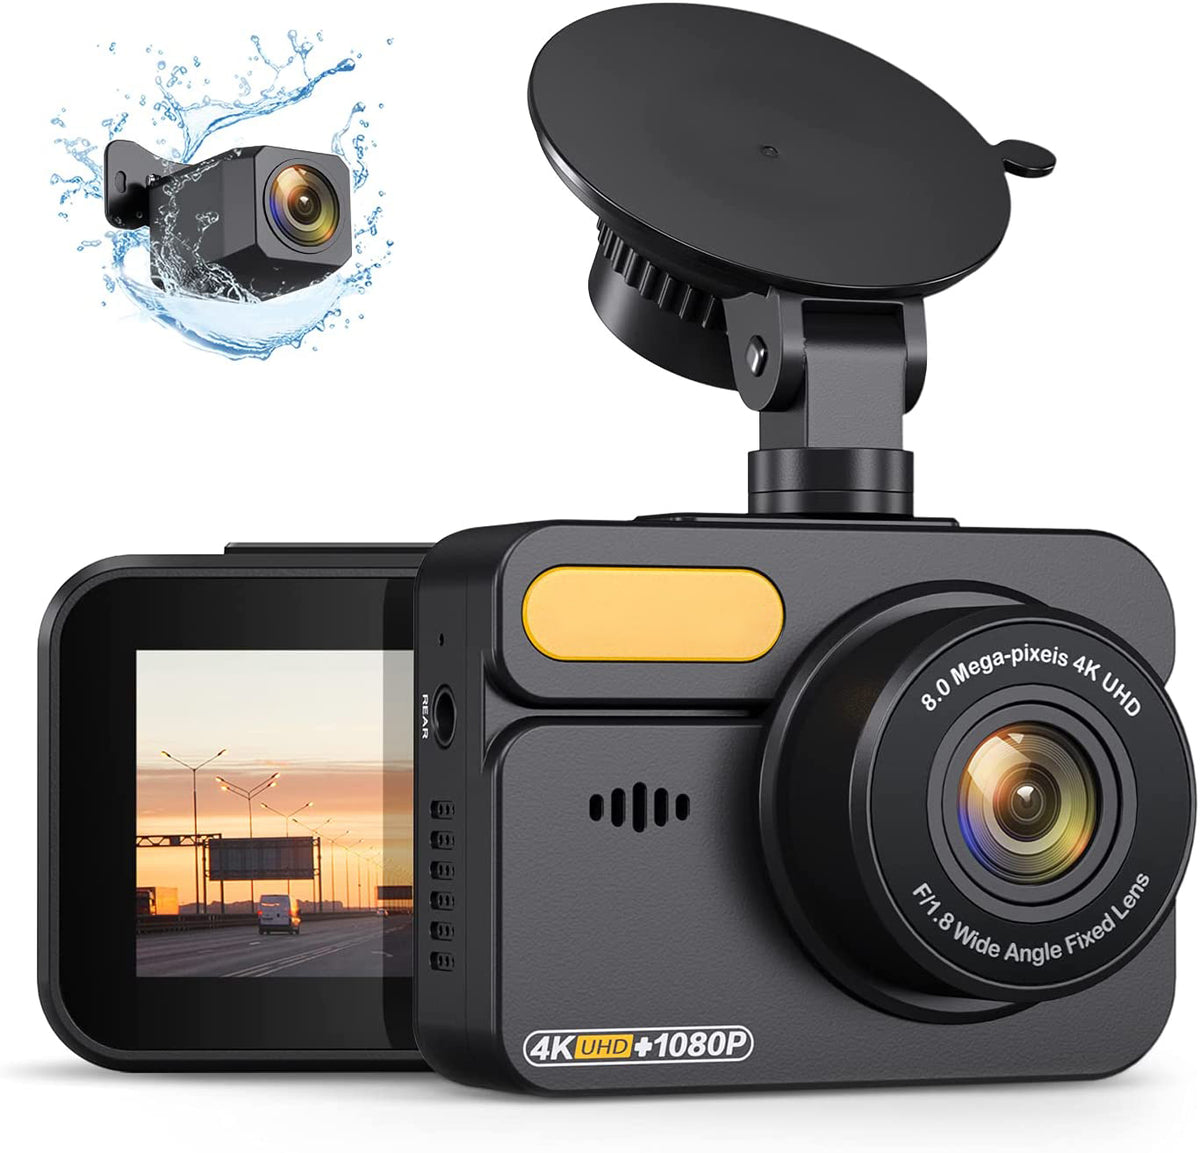 orskey dash cam s800 guide - Apps on Google Play